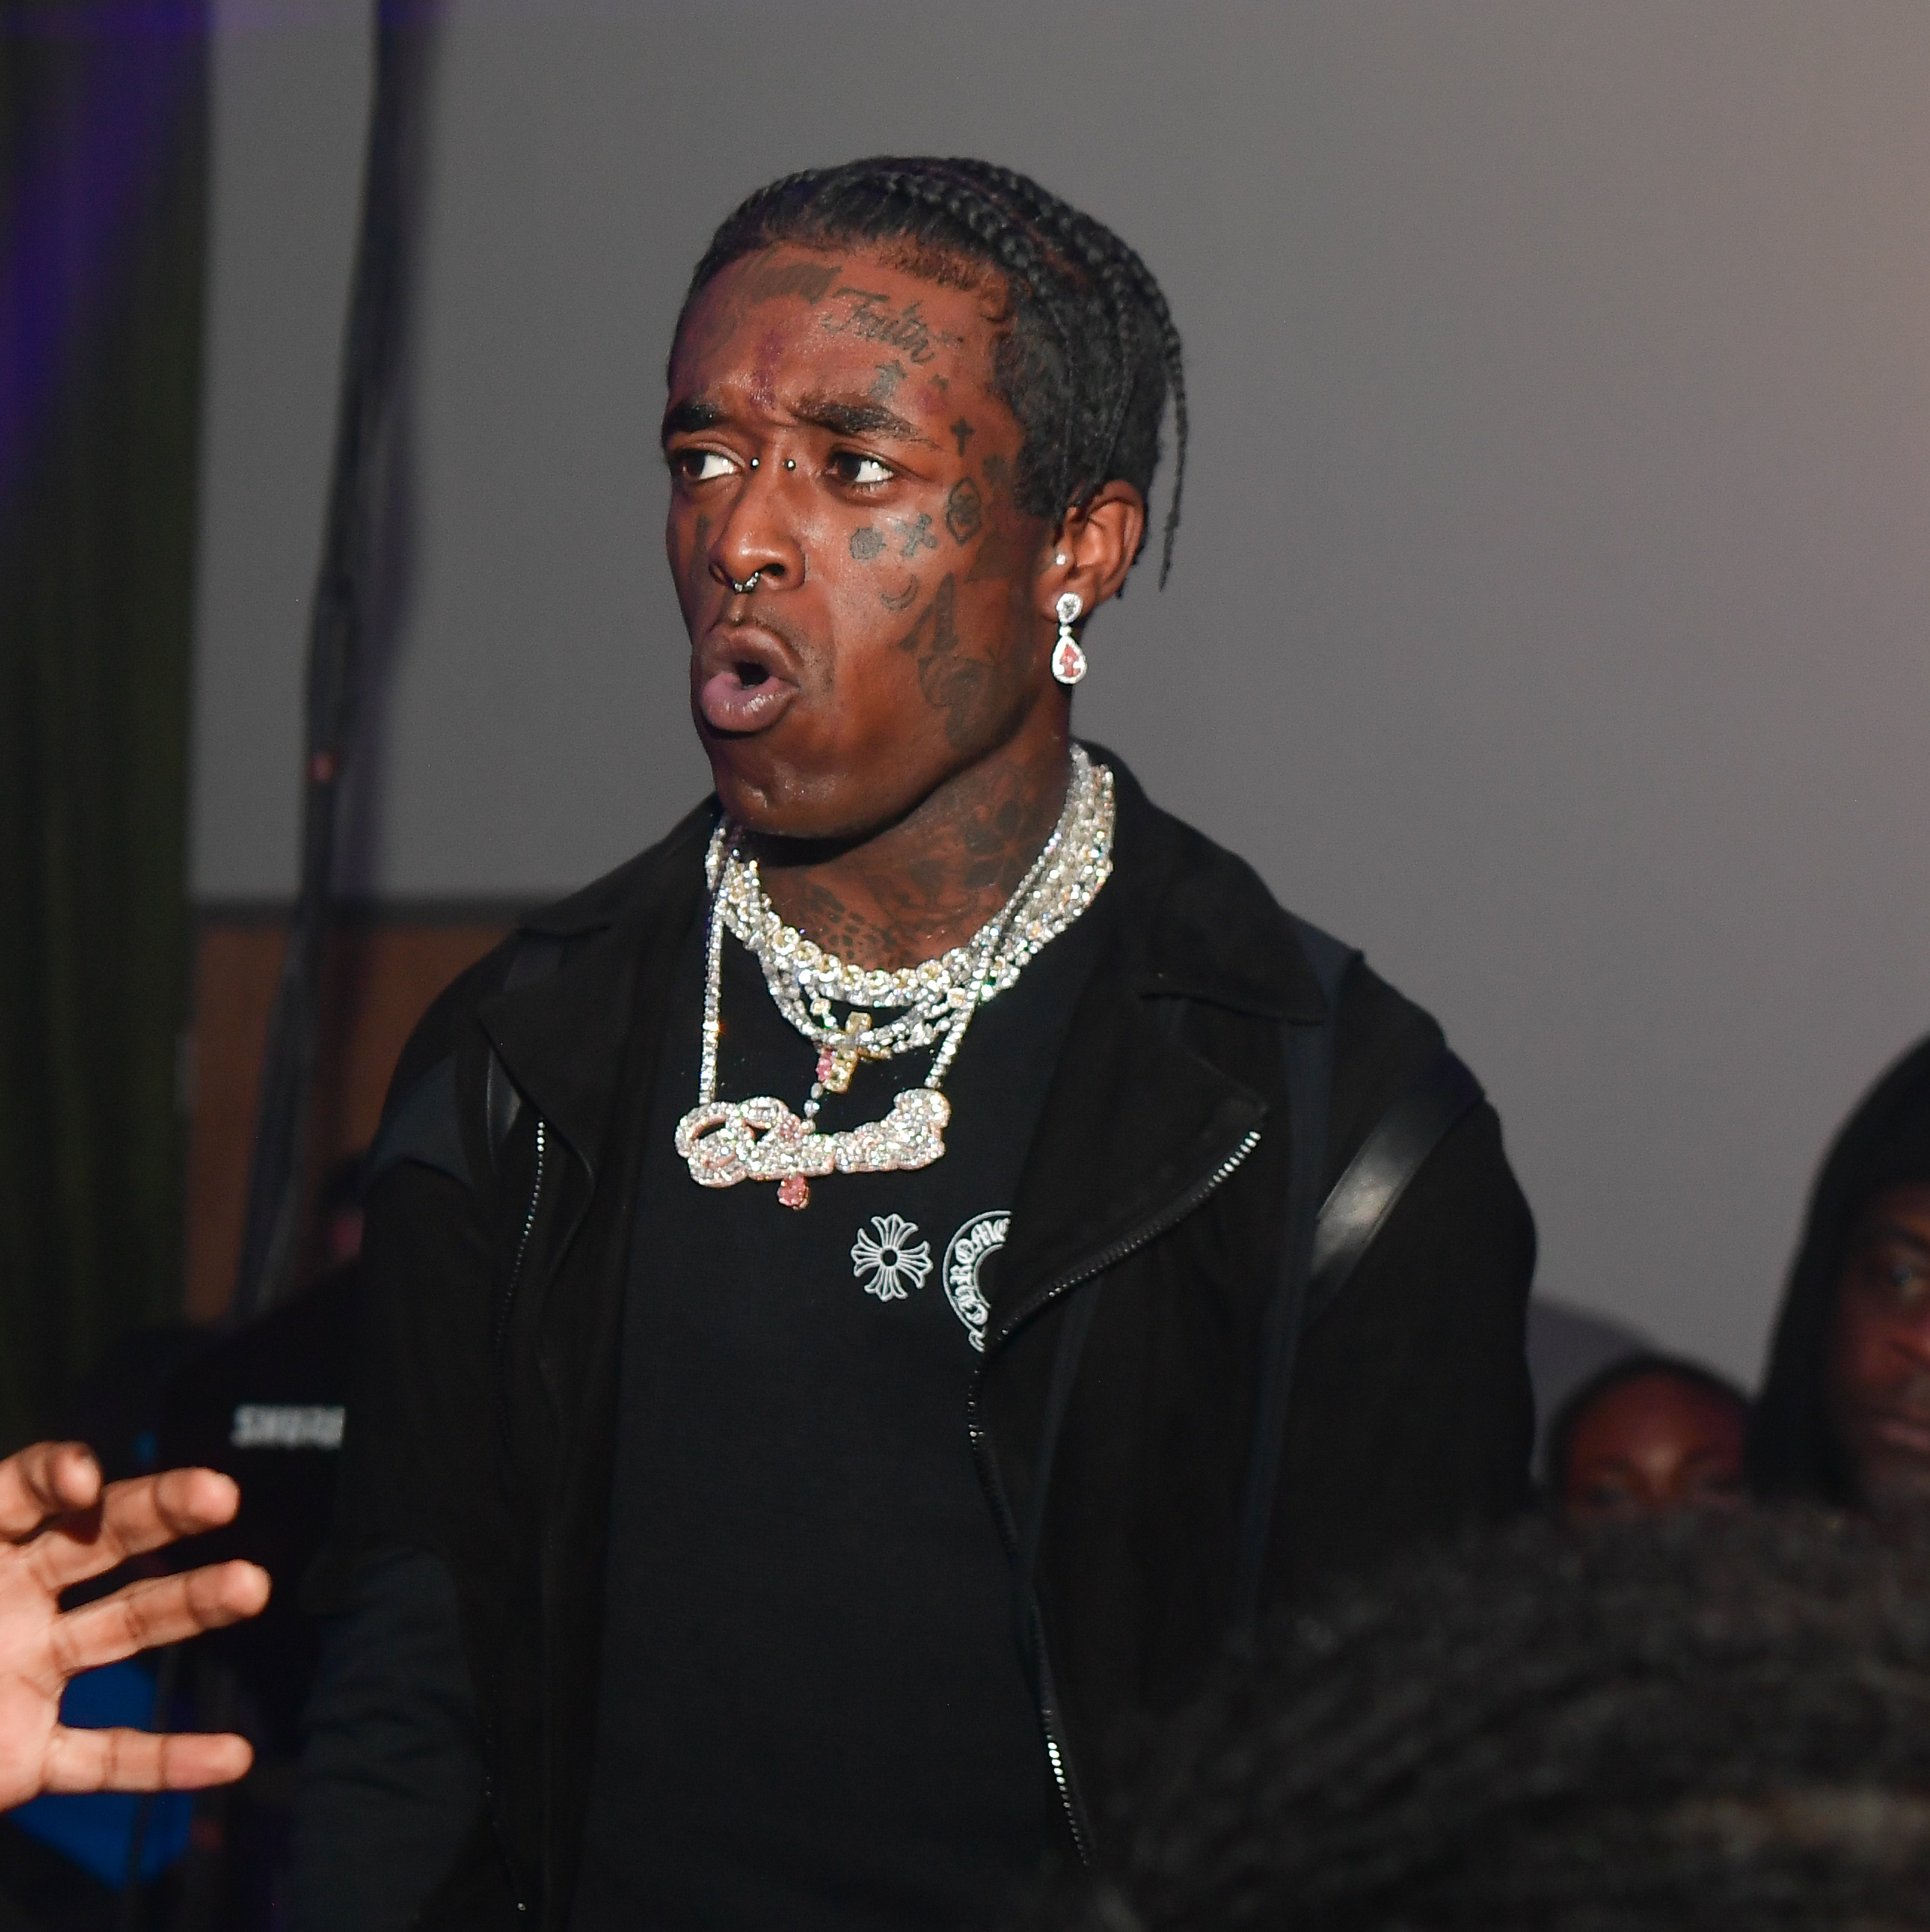 Lil Uzi Vert attends the Forever or Never Birthday Celebration on November 21, 2019, in Atlanta, Georgia. | Source: Getty Images